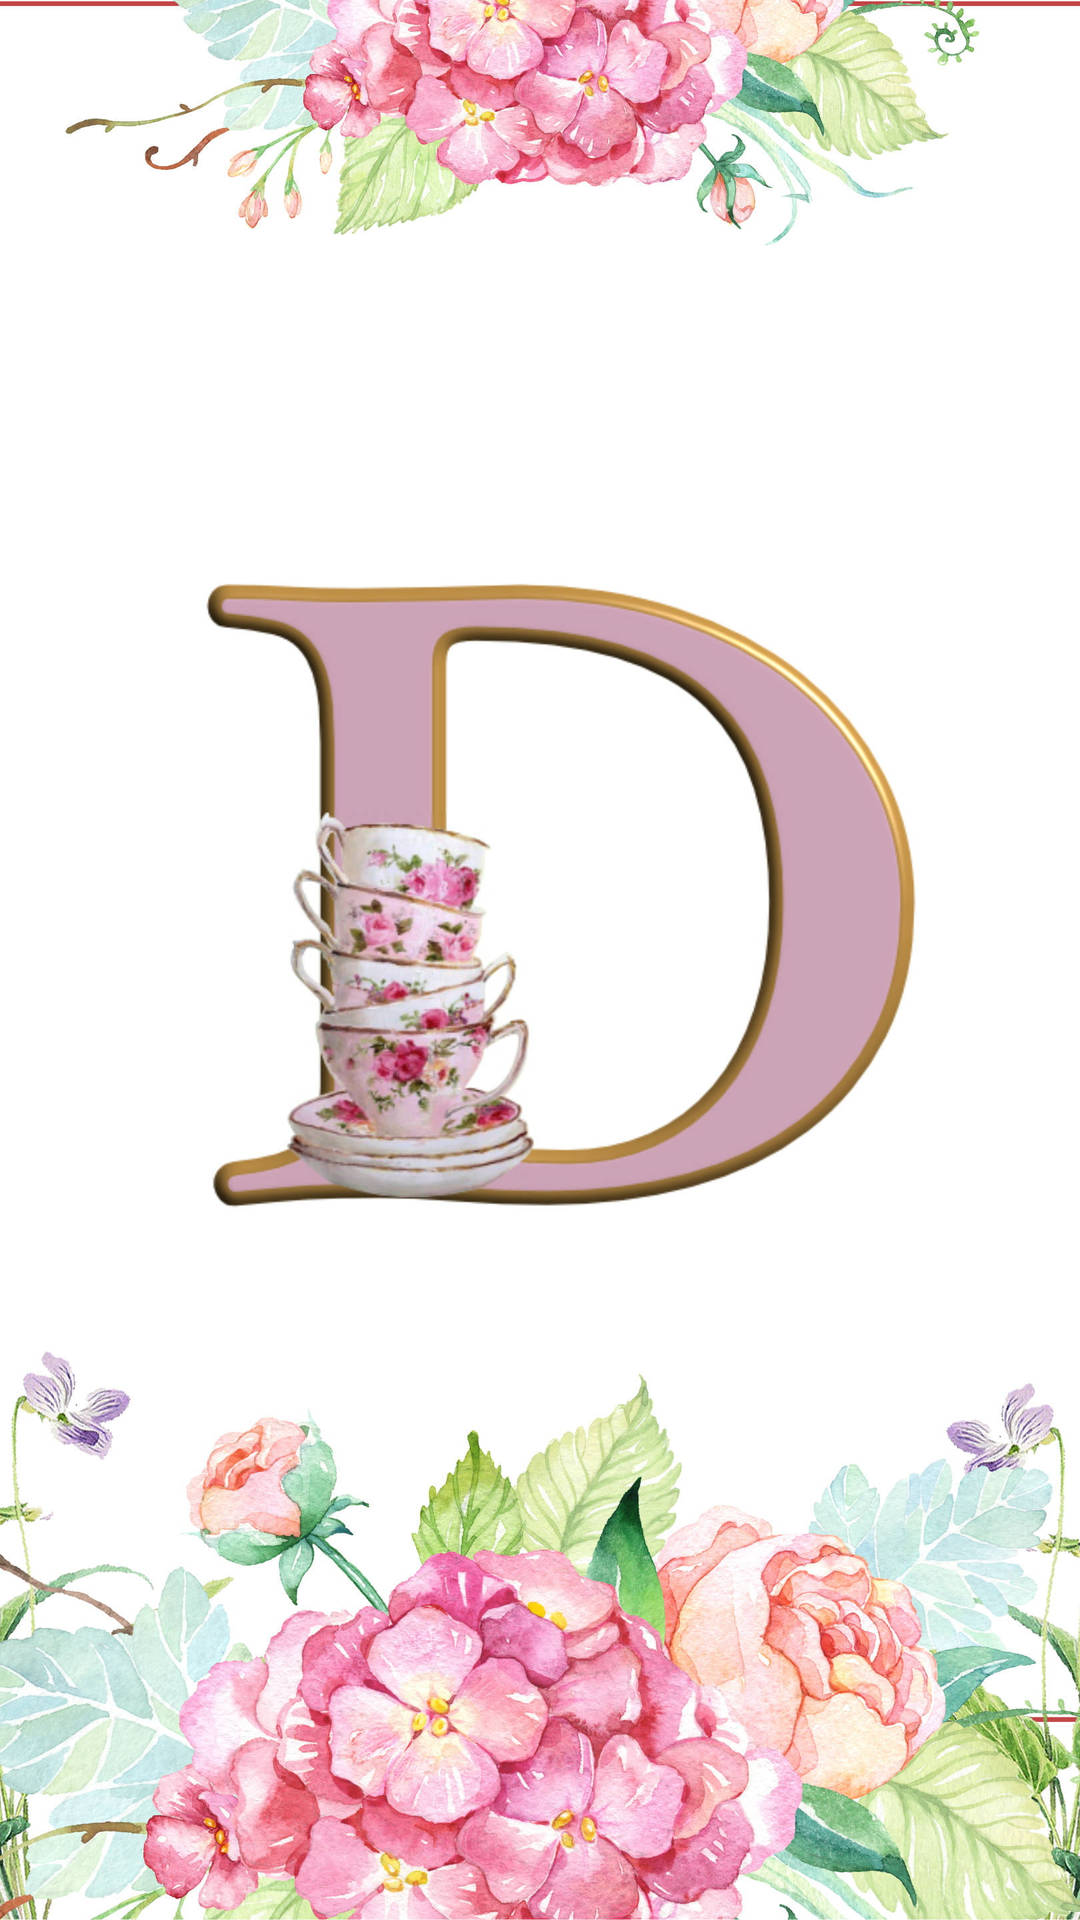 Letter D With Teacups Picture